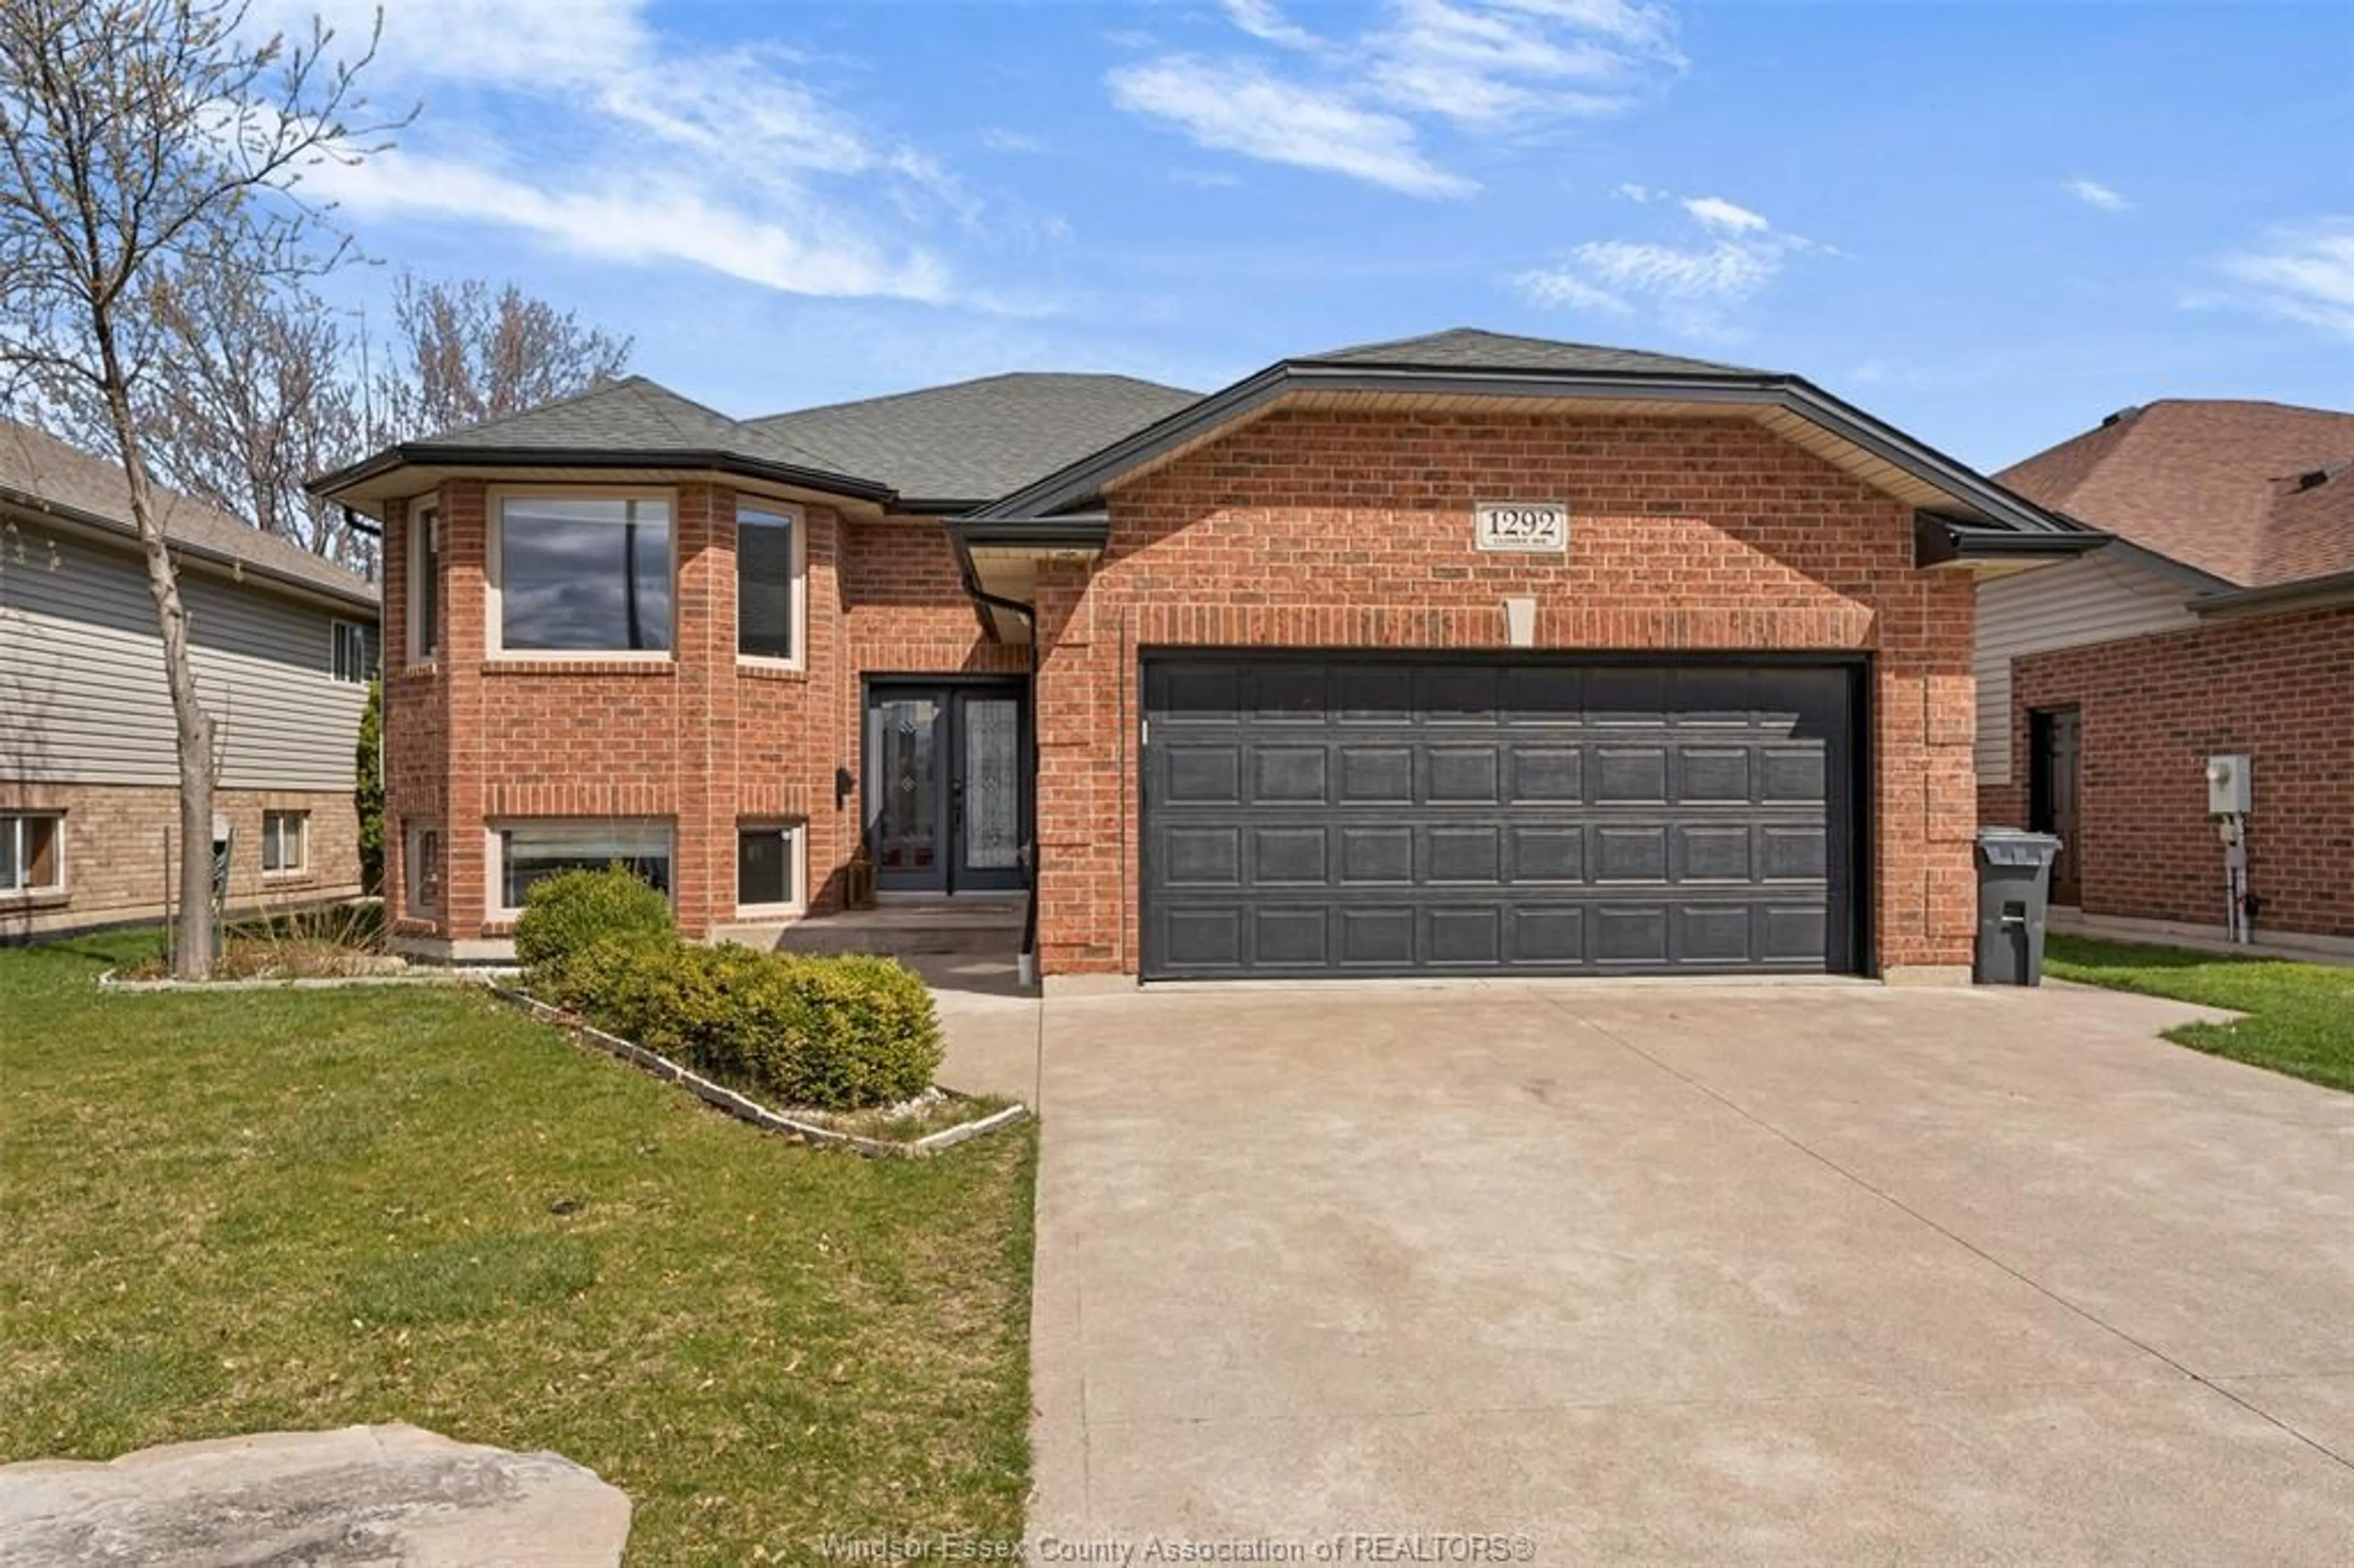 Home with brick exterior material for 1292 CLOVER ..., Windsor Ontario N8P 1R2